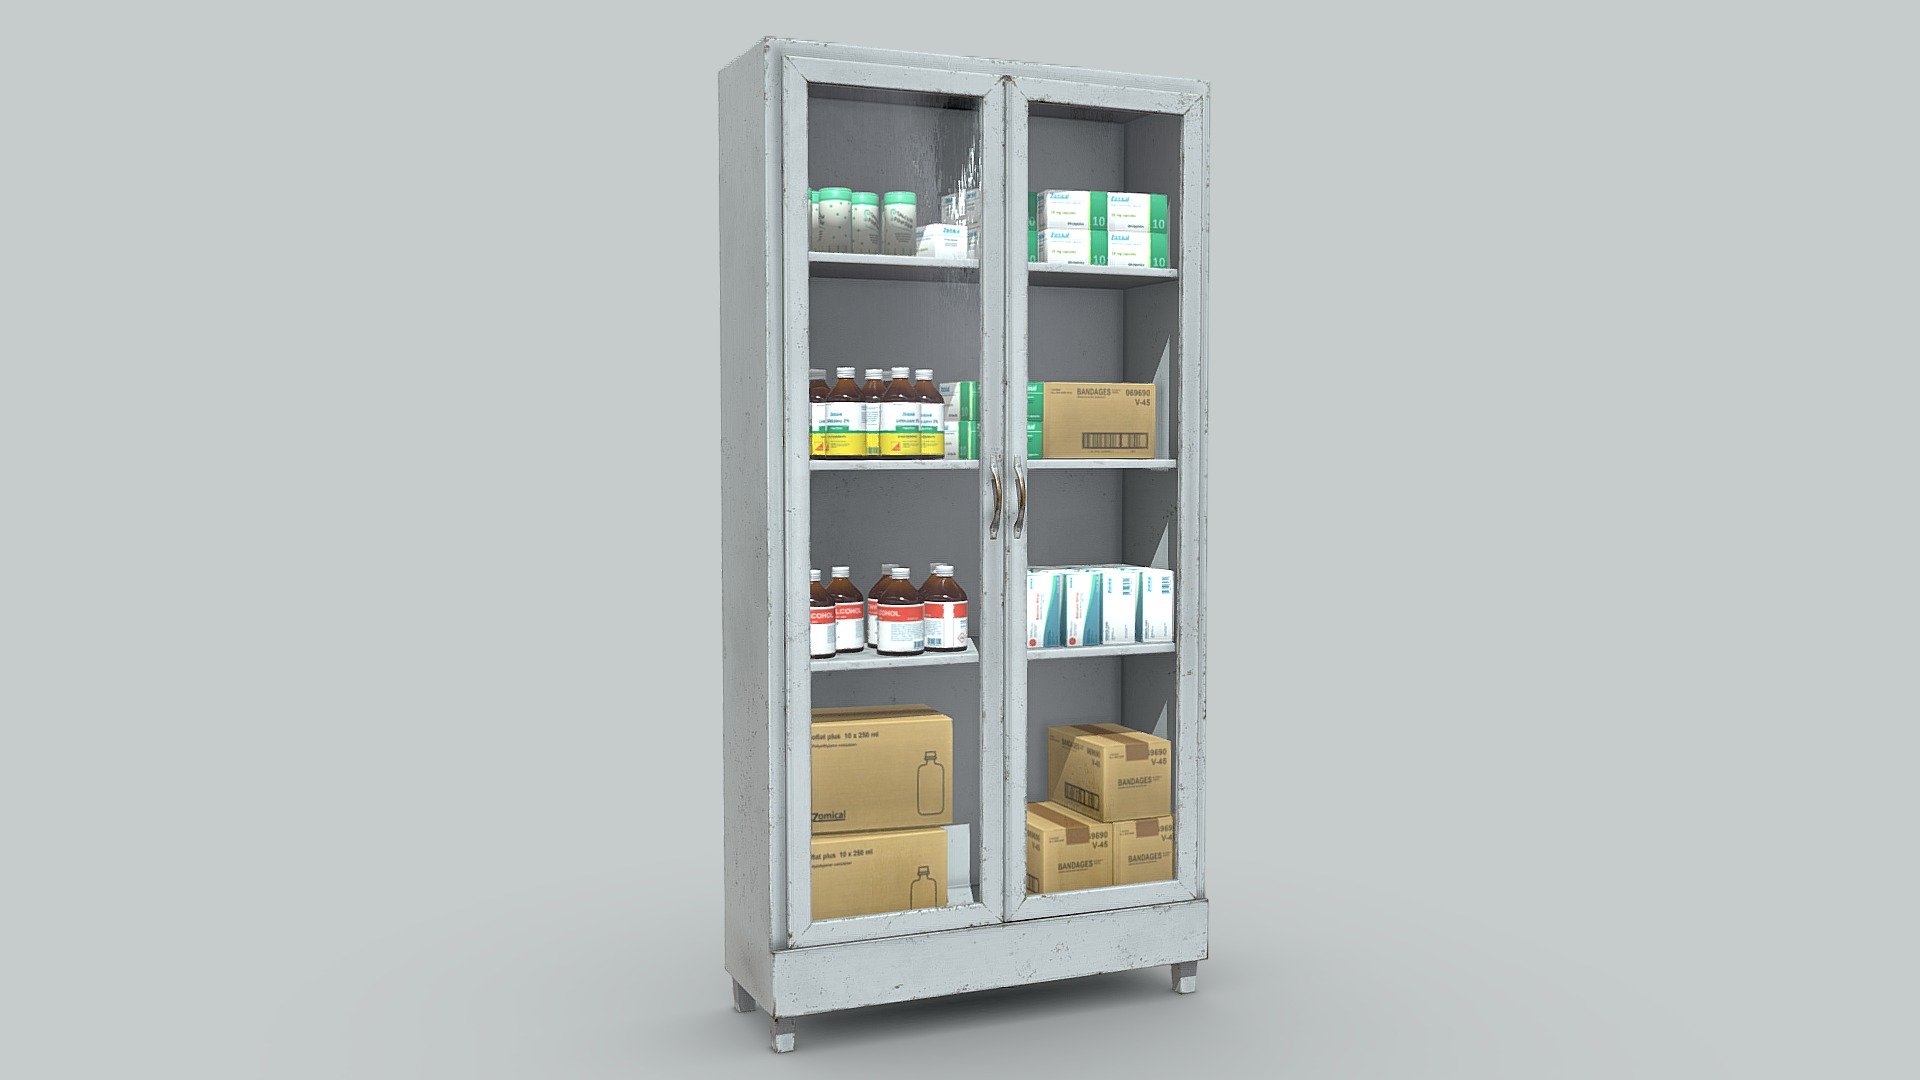 Lowpoly Hospital cupboard with 7045 polys. All quads, real measures, centered in 0,0 coordinates and PBR textures in 4096 x 4096 in two materials. The medicines mesh are duplicated to use the same textures. Ready to use. 
See the bed for this asset here: https://skfb.ly/oMVtn 
See the Hospital drip for this asset here: https://skfb.ly/oNuup
See the oxygen gas tank here: https://skfb.ly/oNxK6
See the Medicines trolley here: https://skfb.ly/oNT6v - Medicines hospital cupboard - Buy Royalty Free 3D model by markusenes 3d model